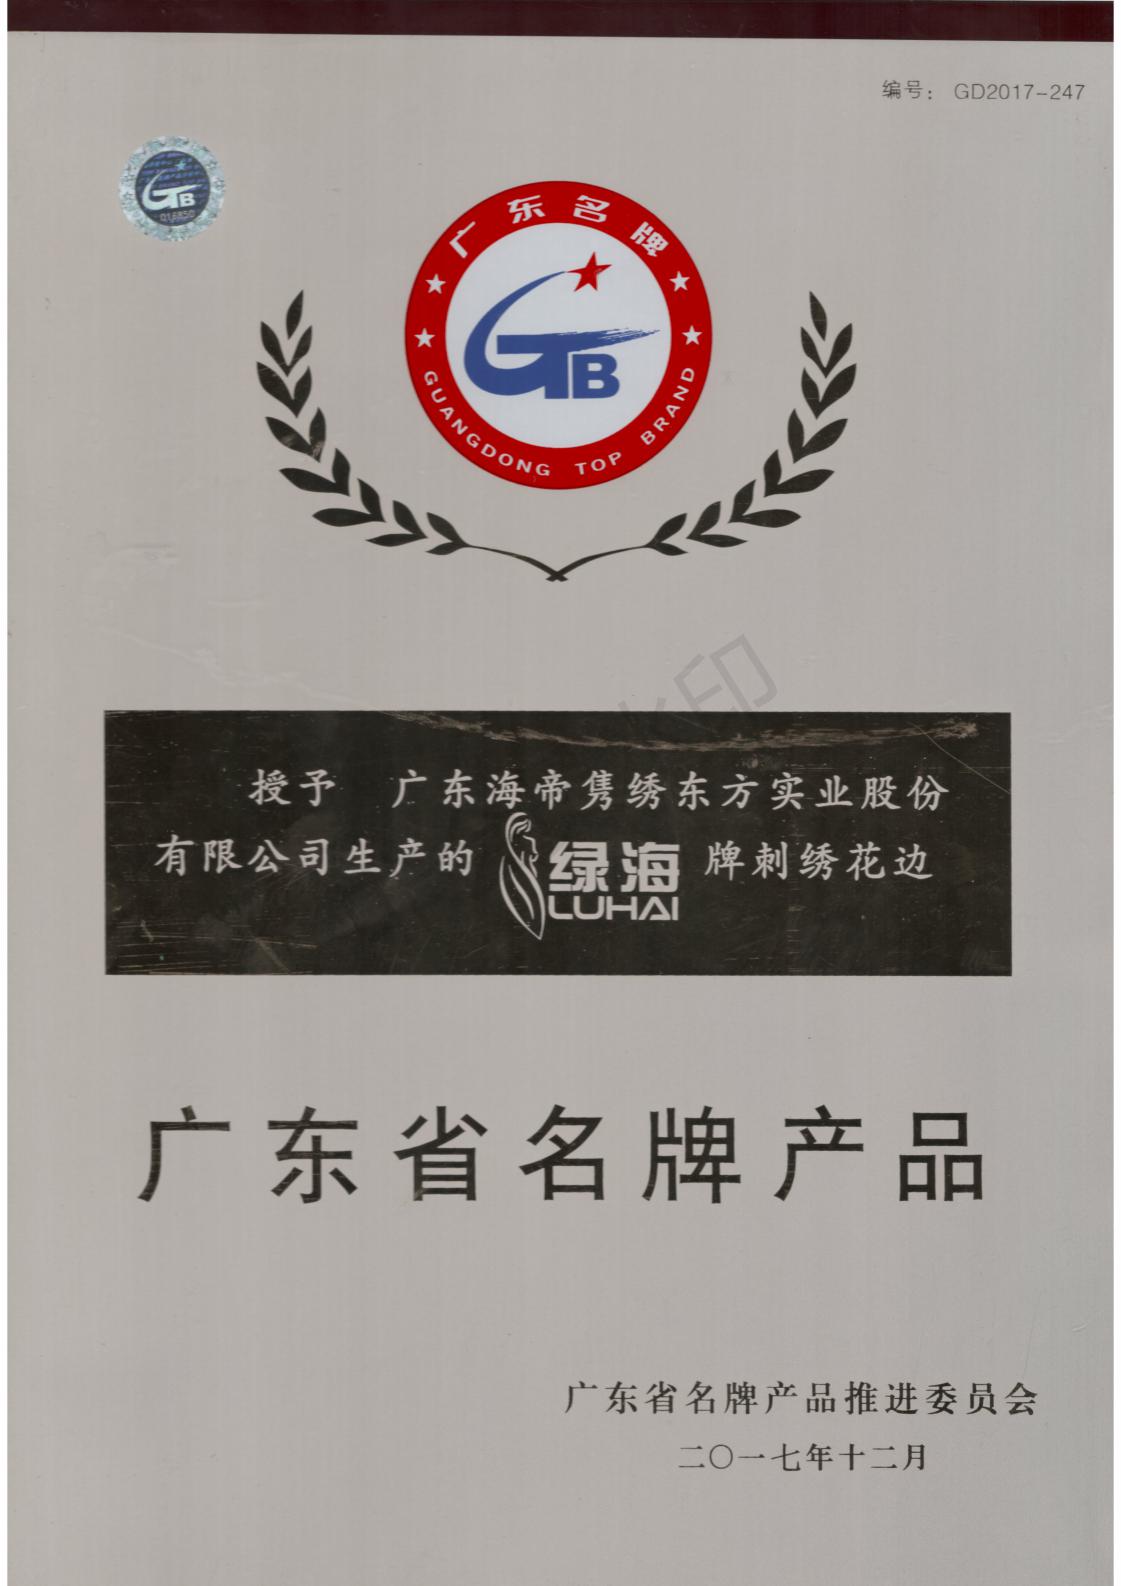 Famous Brand Products in Guangdong Province